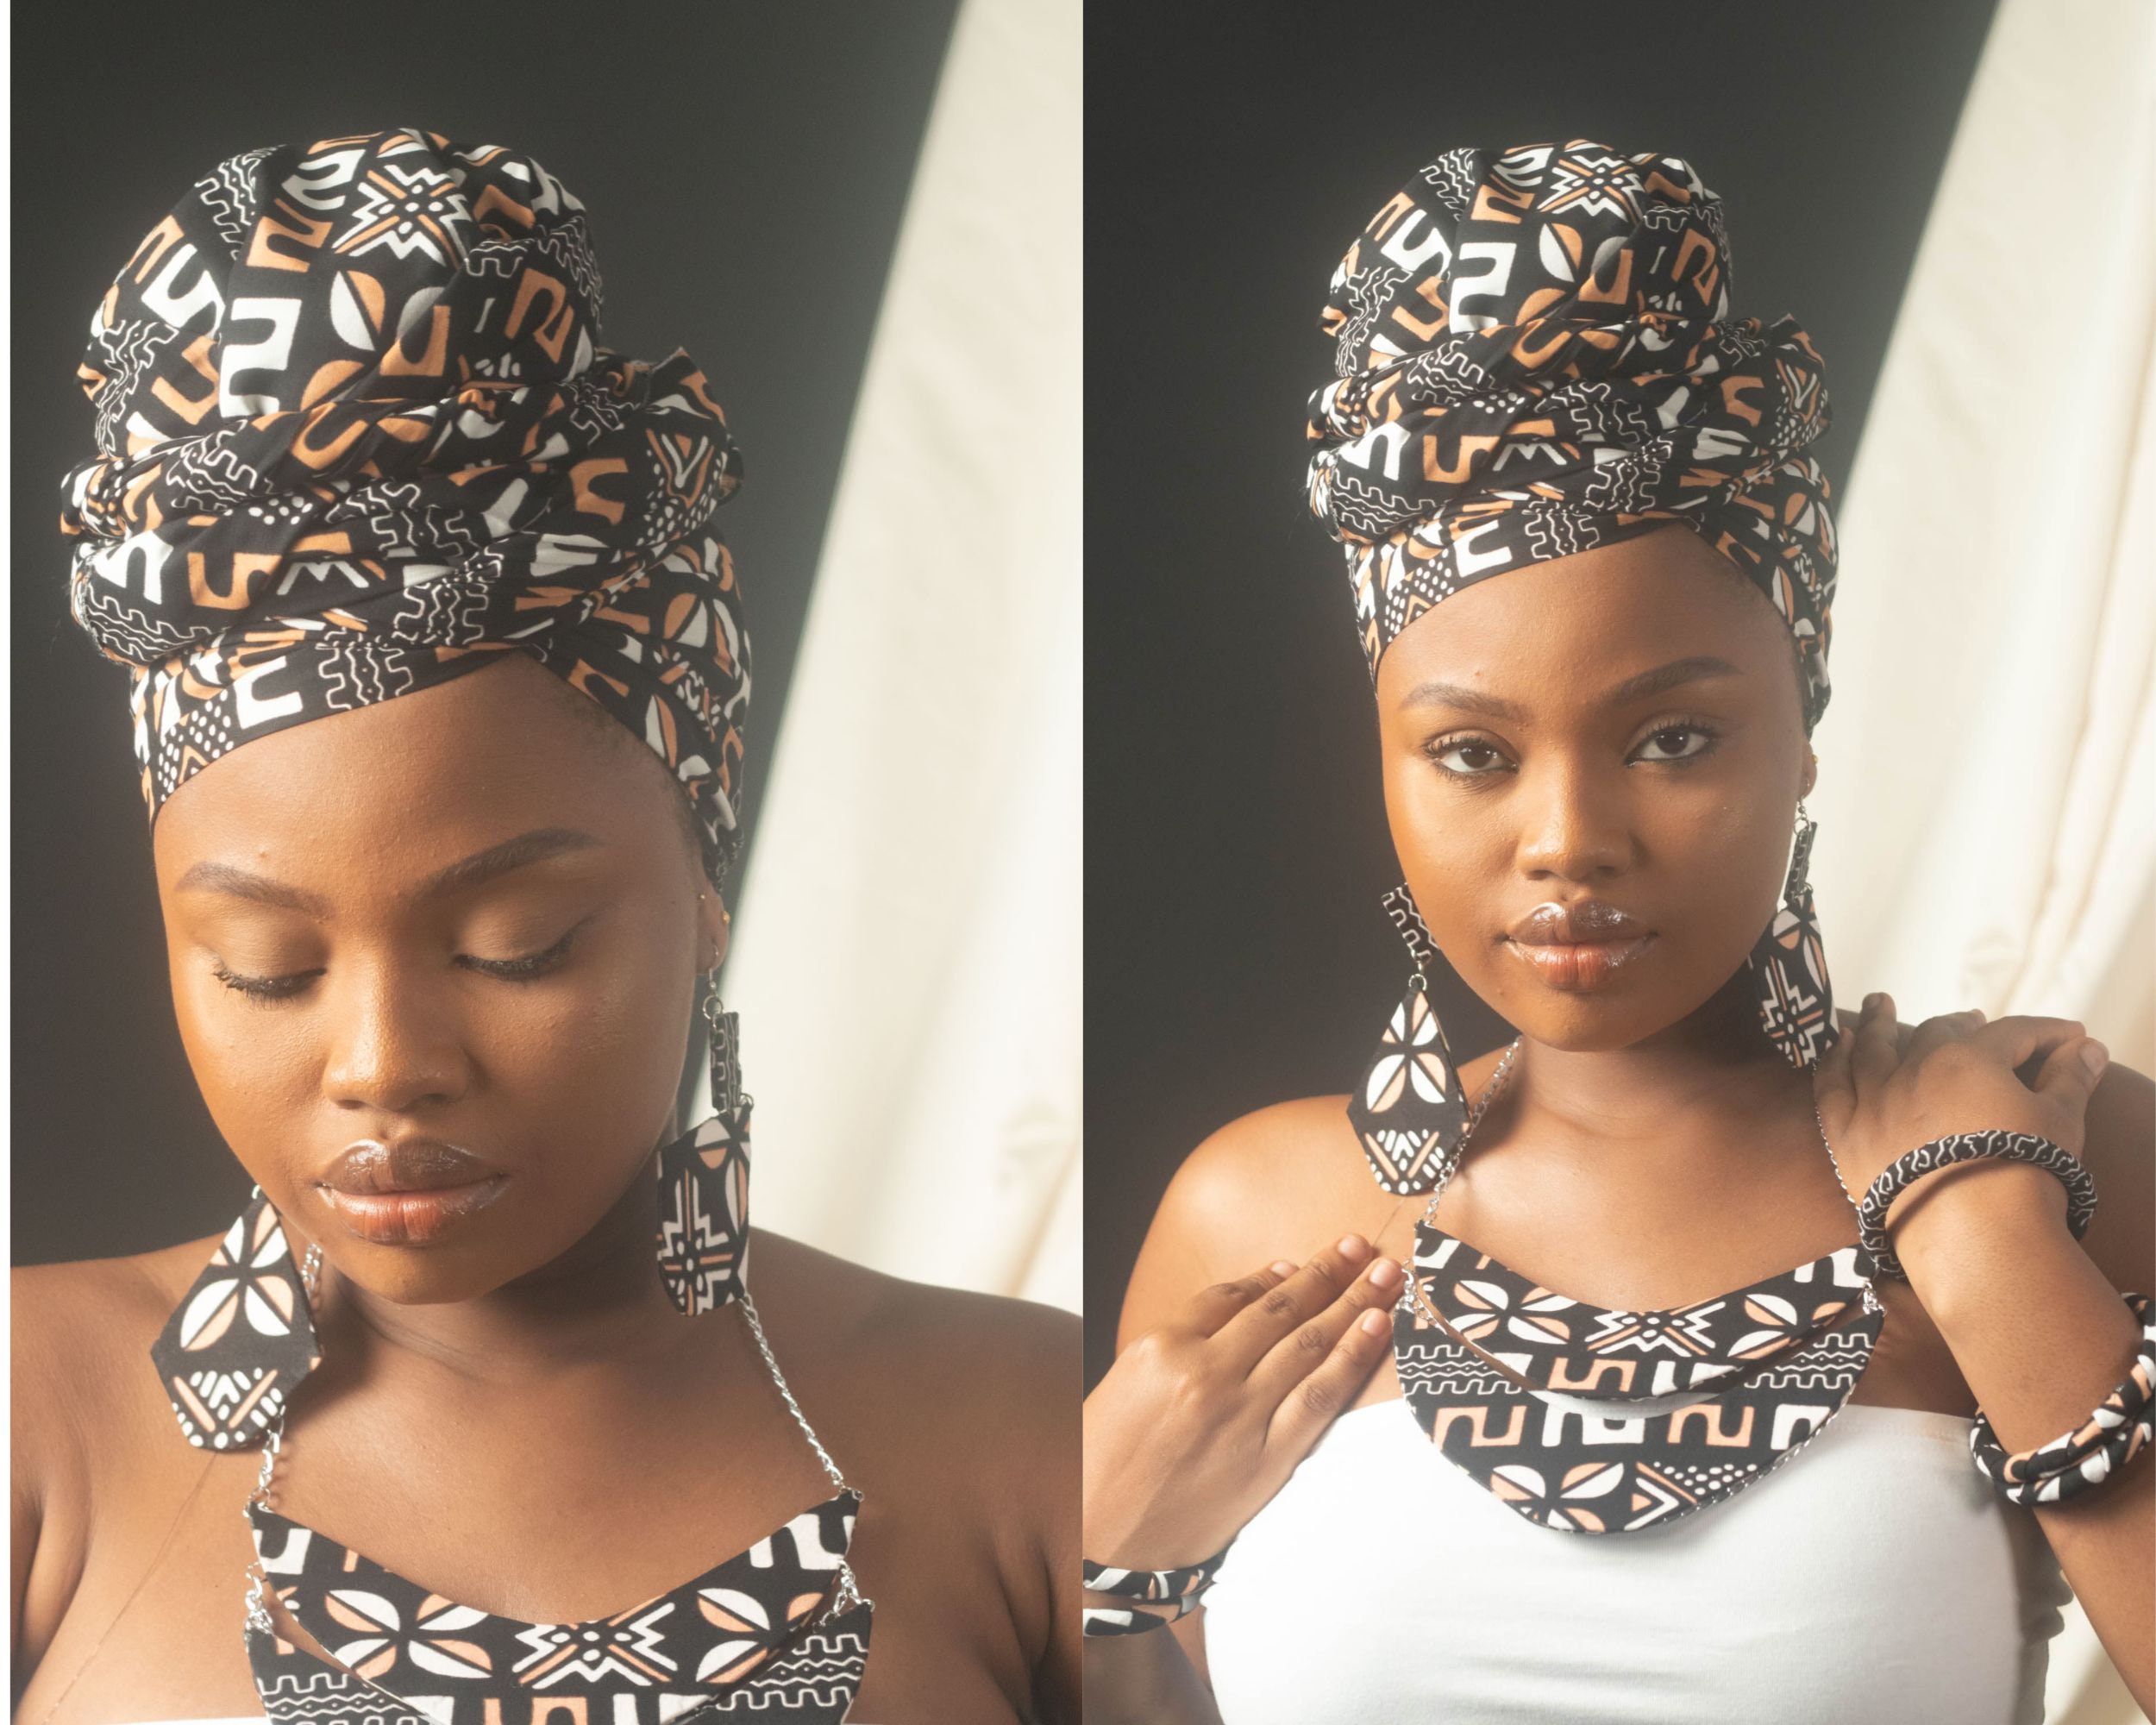 Shop African Clothing, Jewelry, Accessories and more